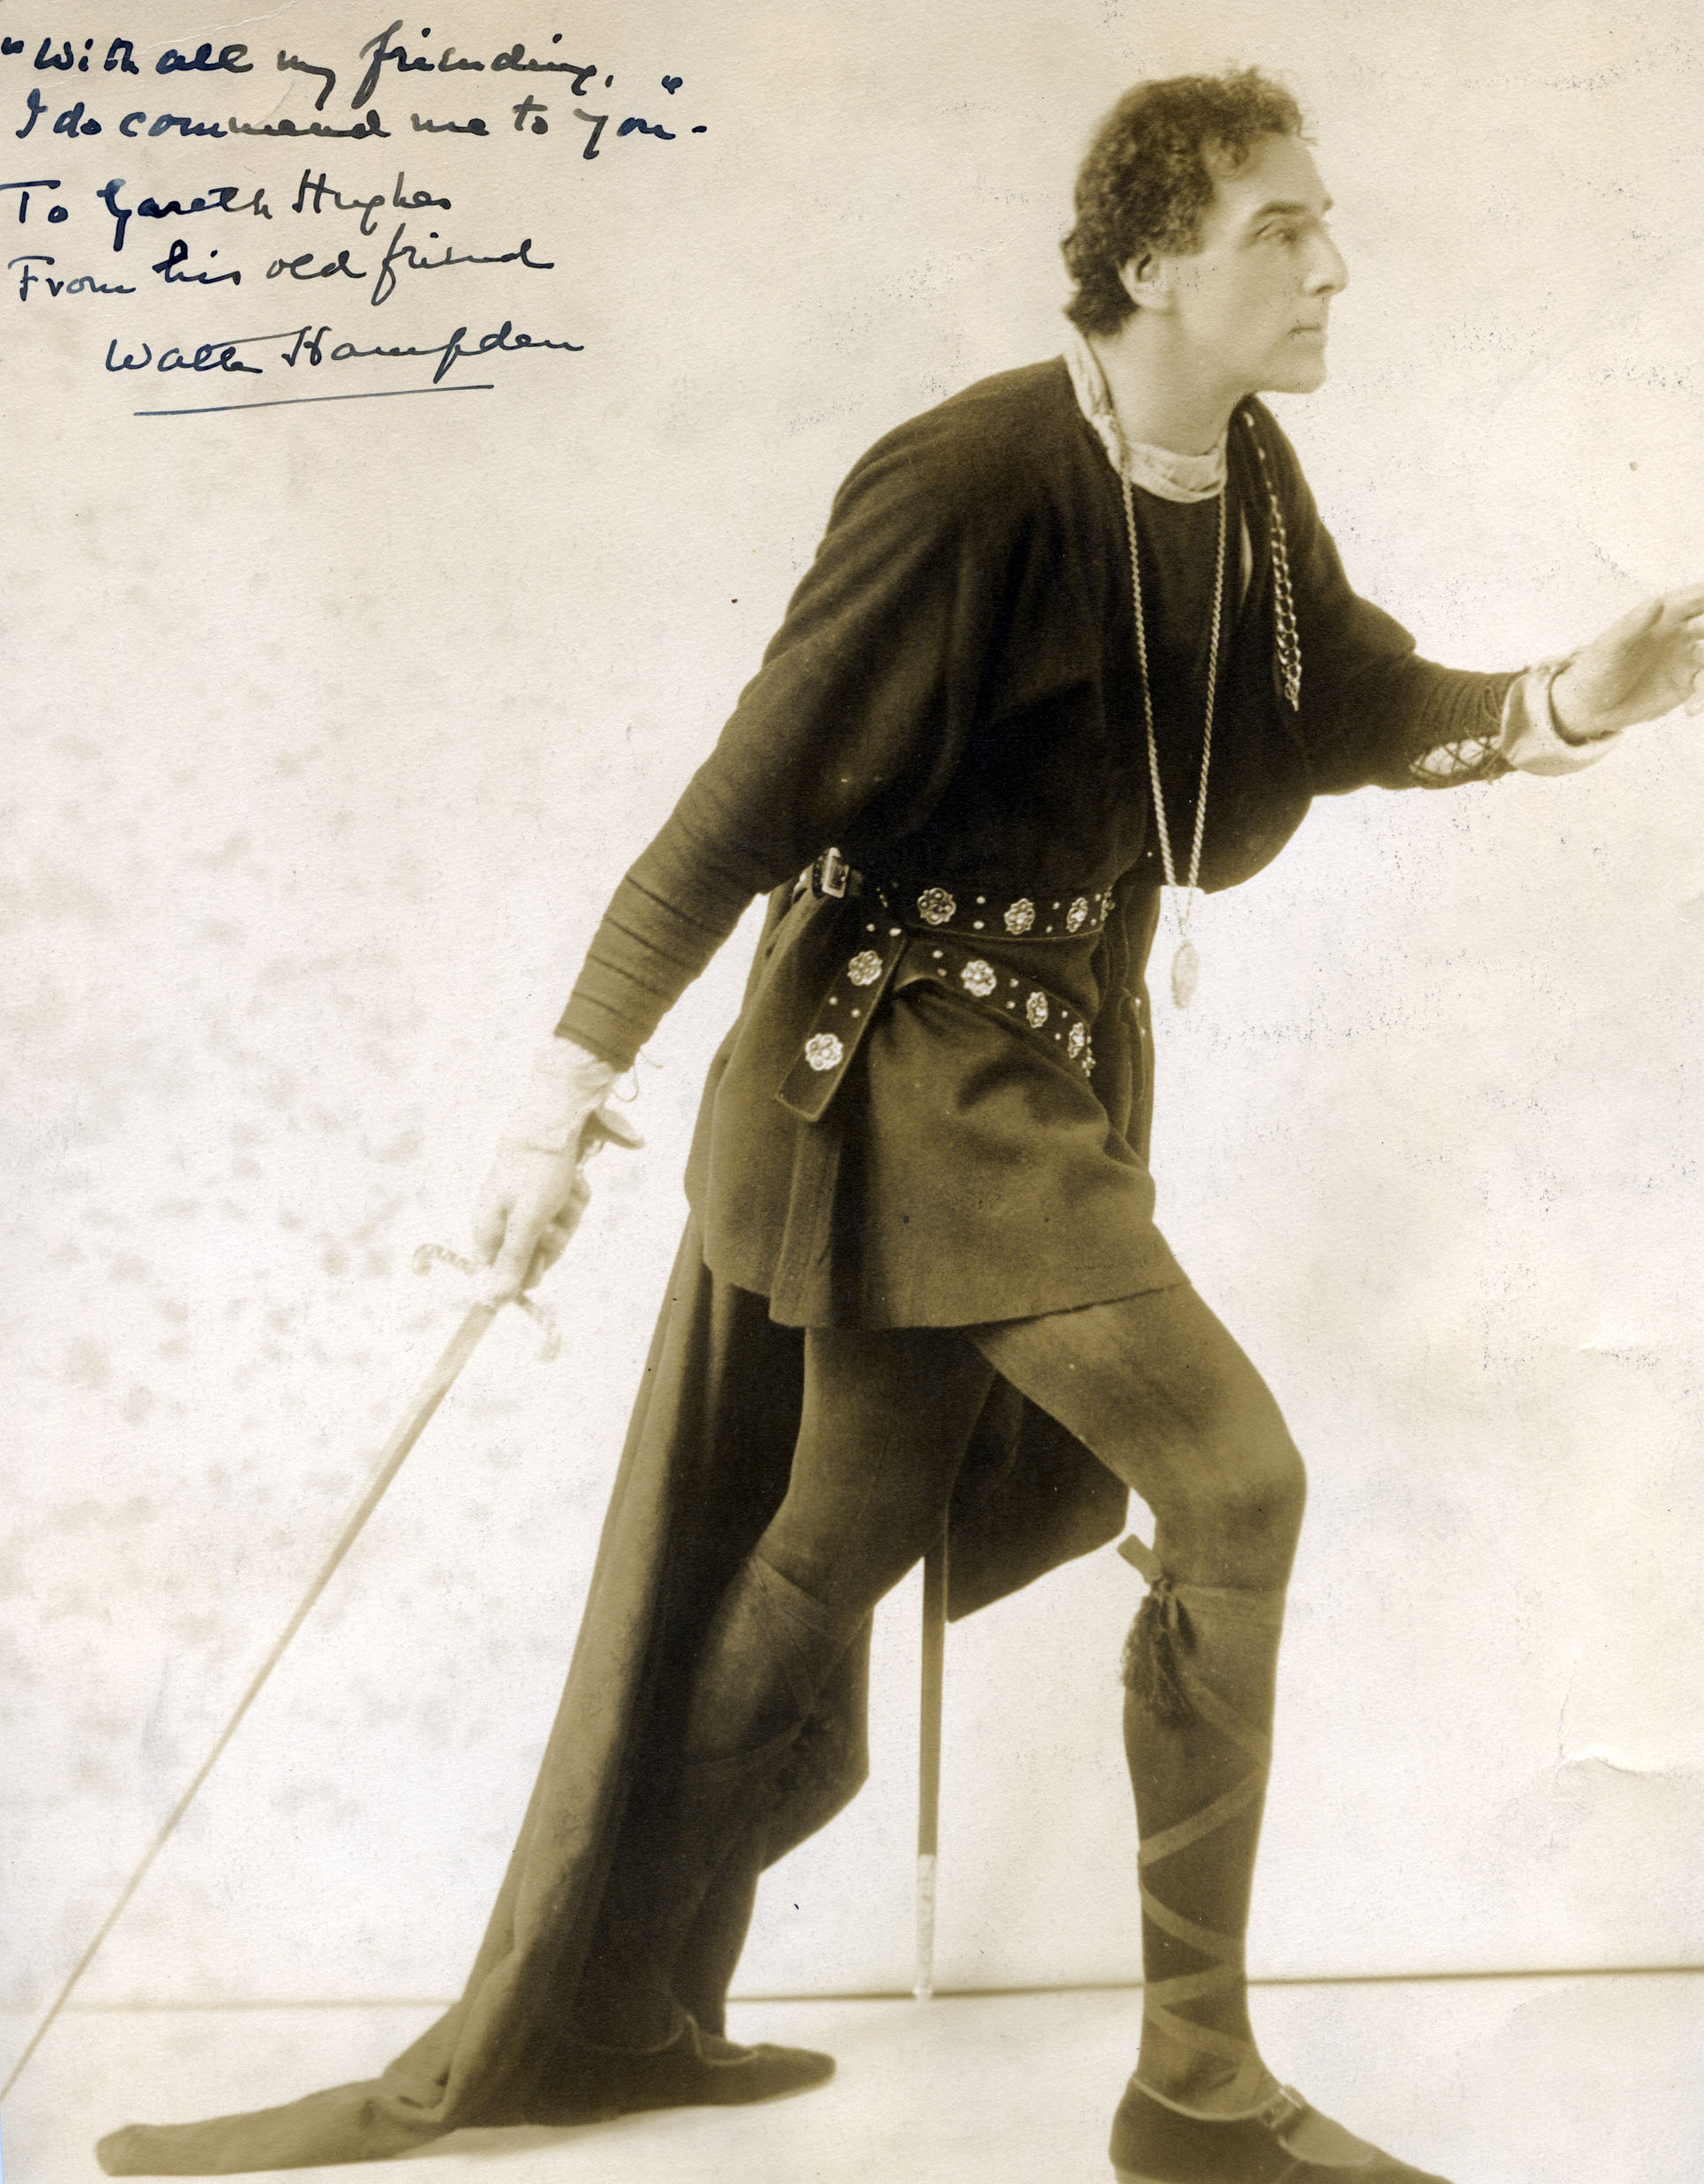 Hampden as Hamlet, circa late 1910s-1920s. The photo bears the dedication "with all my friendship, I do commend me to you. To Gareth Hughes from his old friend Walter Hampden"